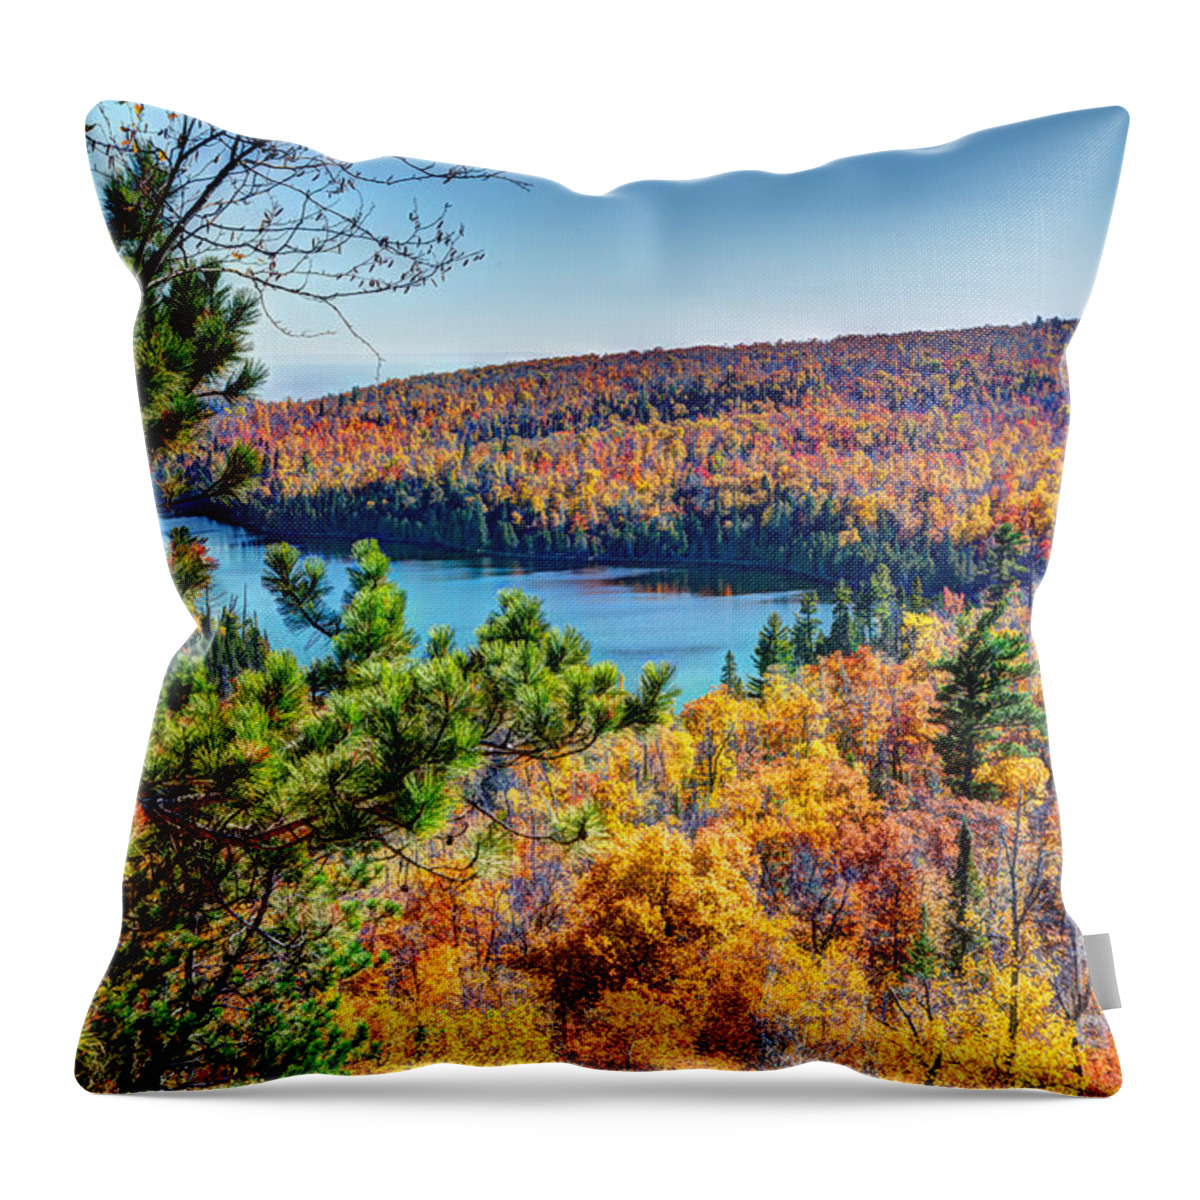 North Shore Throw Pillow featuring the photograph Autumn Colors Overlooking Lax Lake Tettegouche State Park II by Wayne Moran